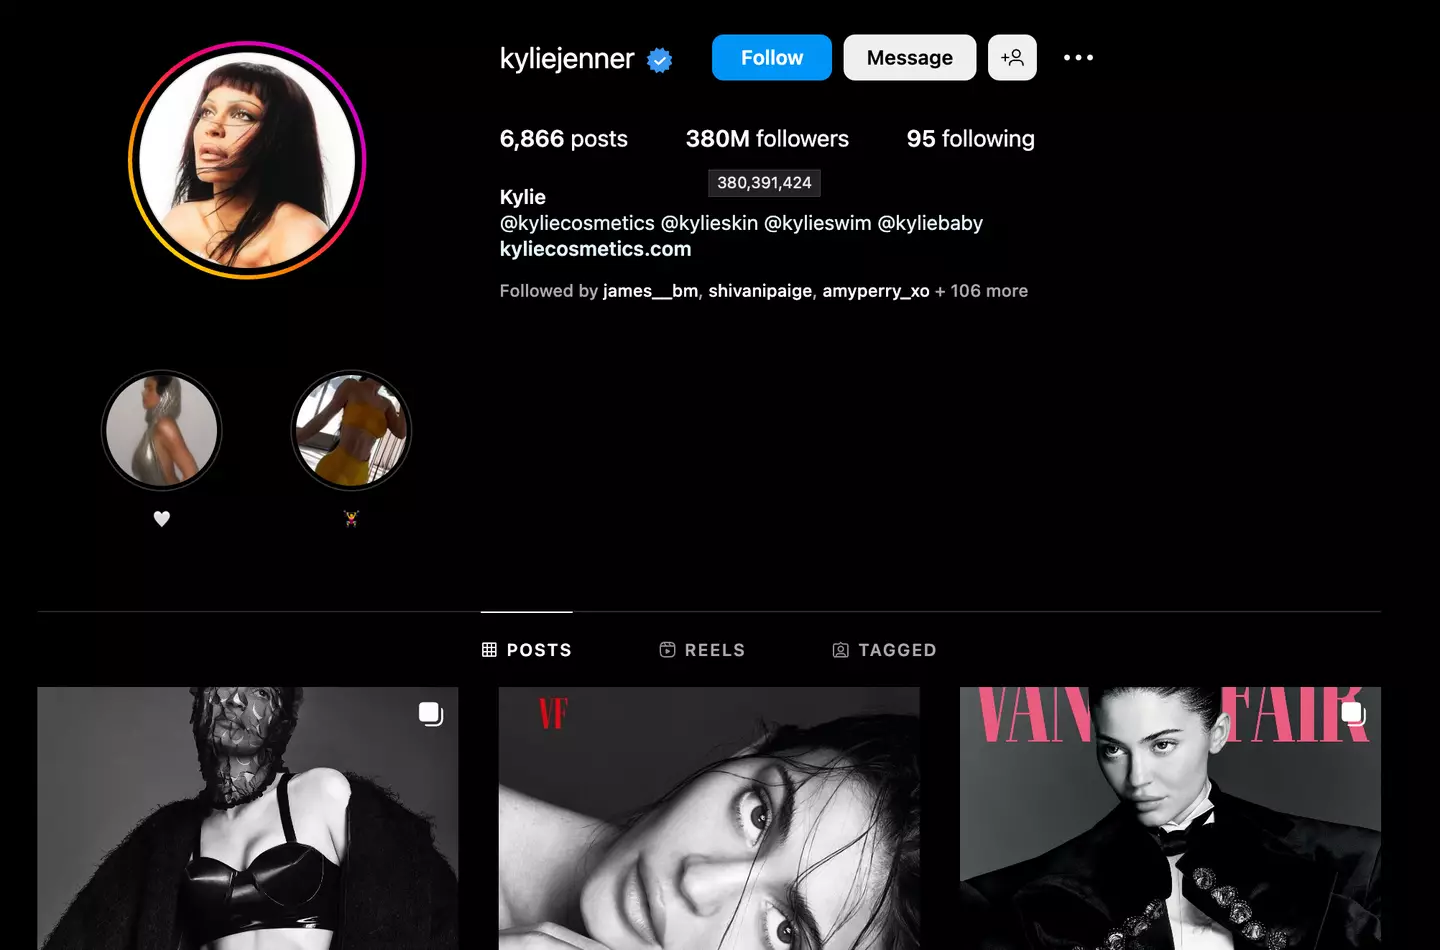 Kylie Jenner is no longer the most-followed woman on Instagram.